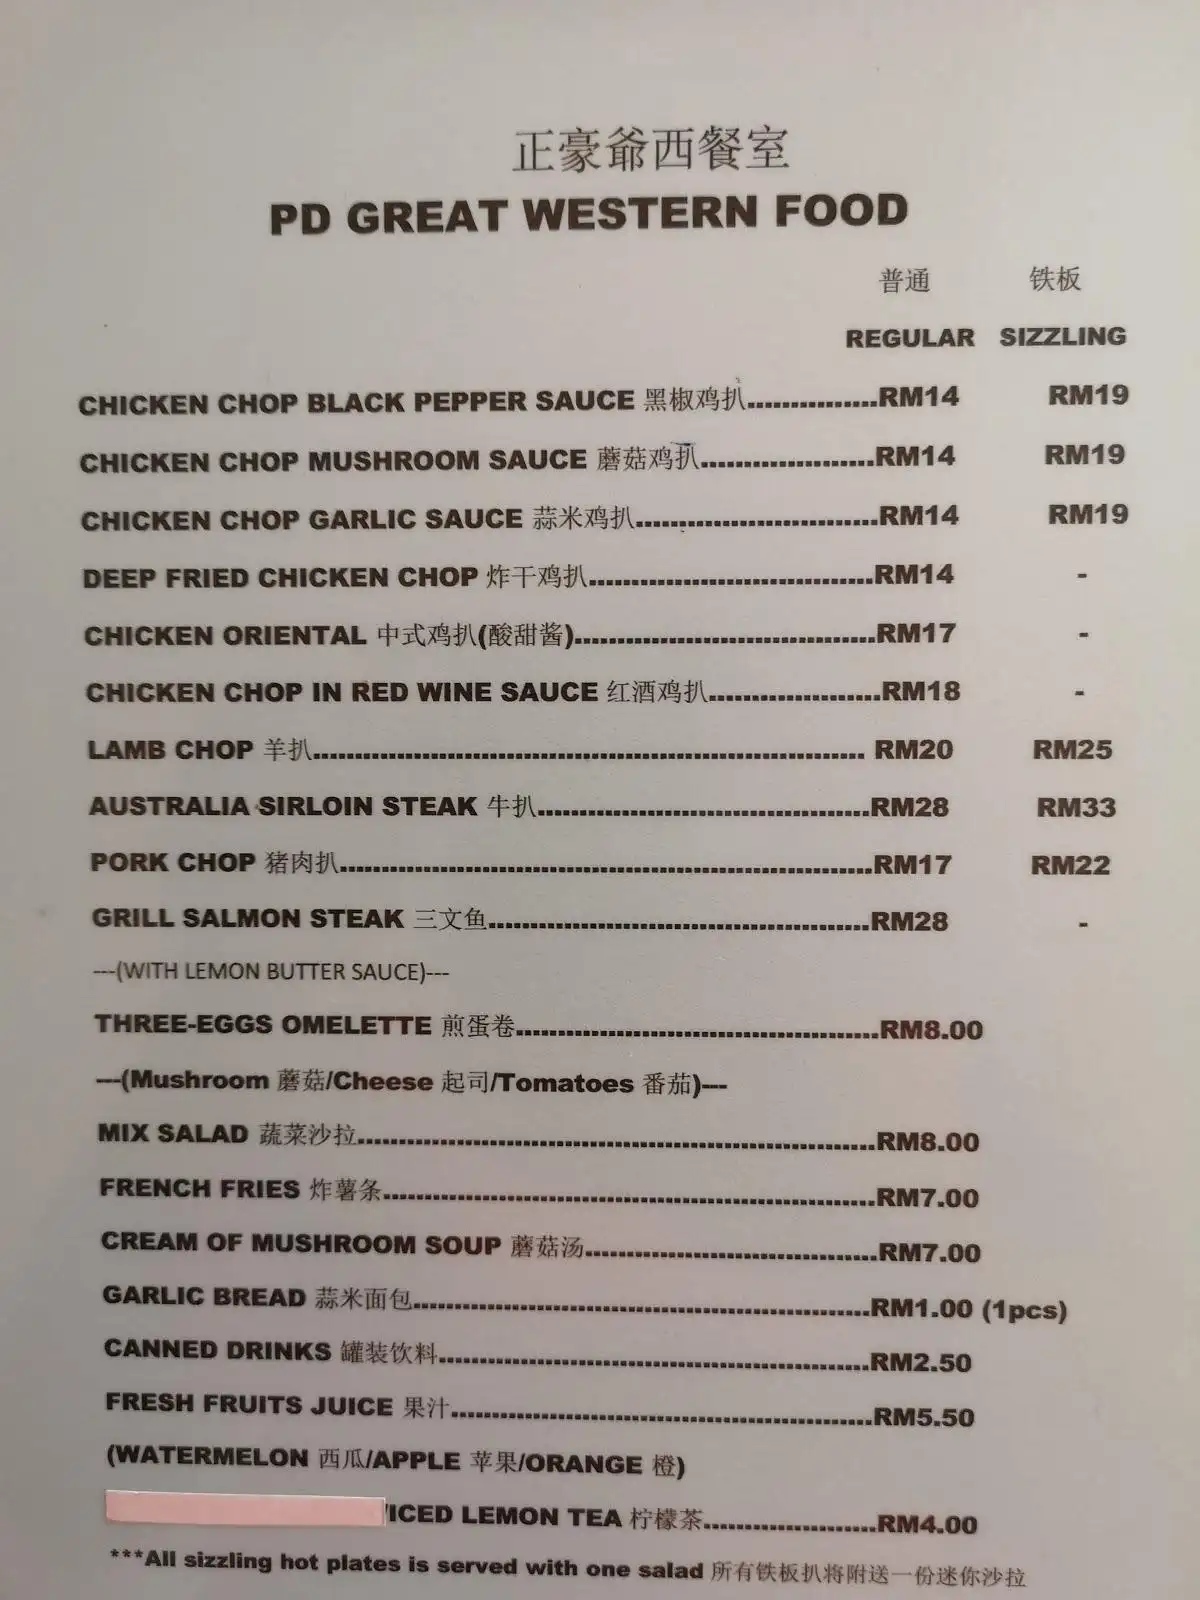 PD GREAT WESTERN FOOD